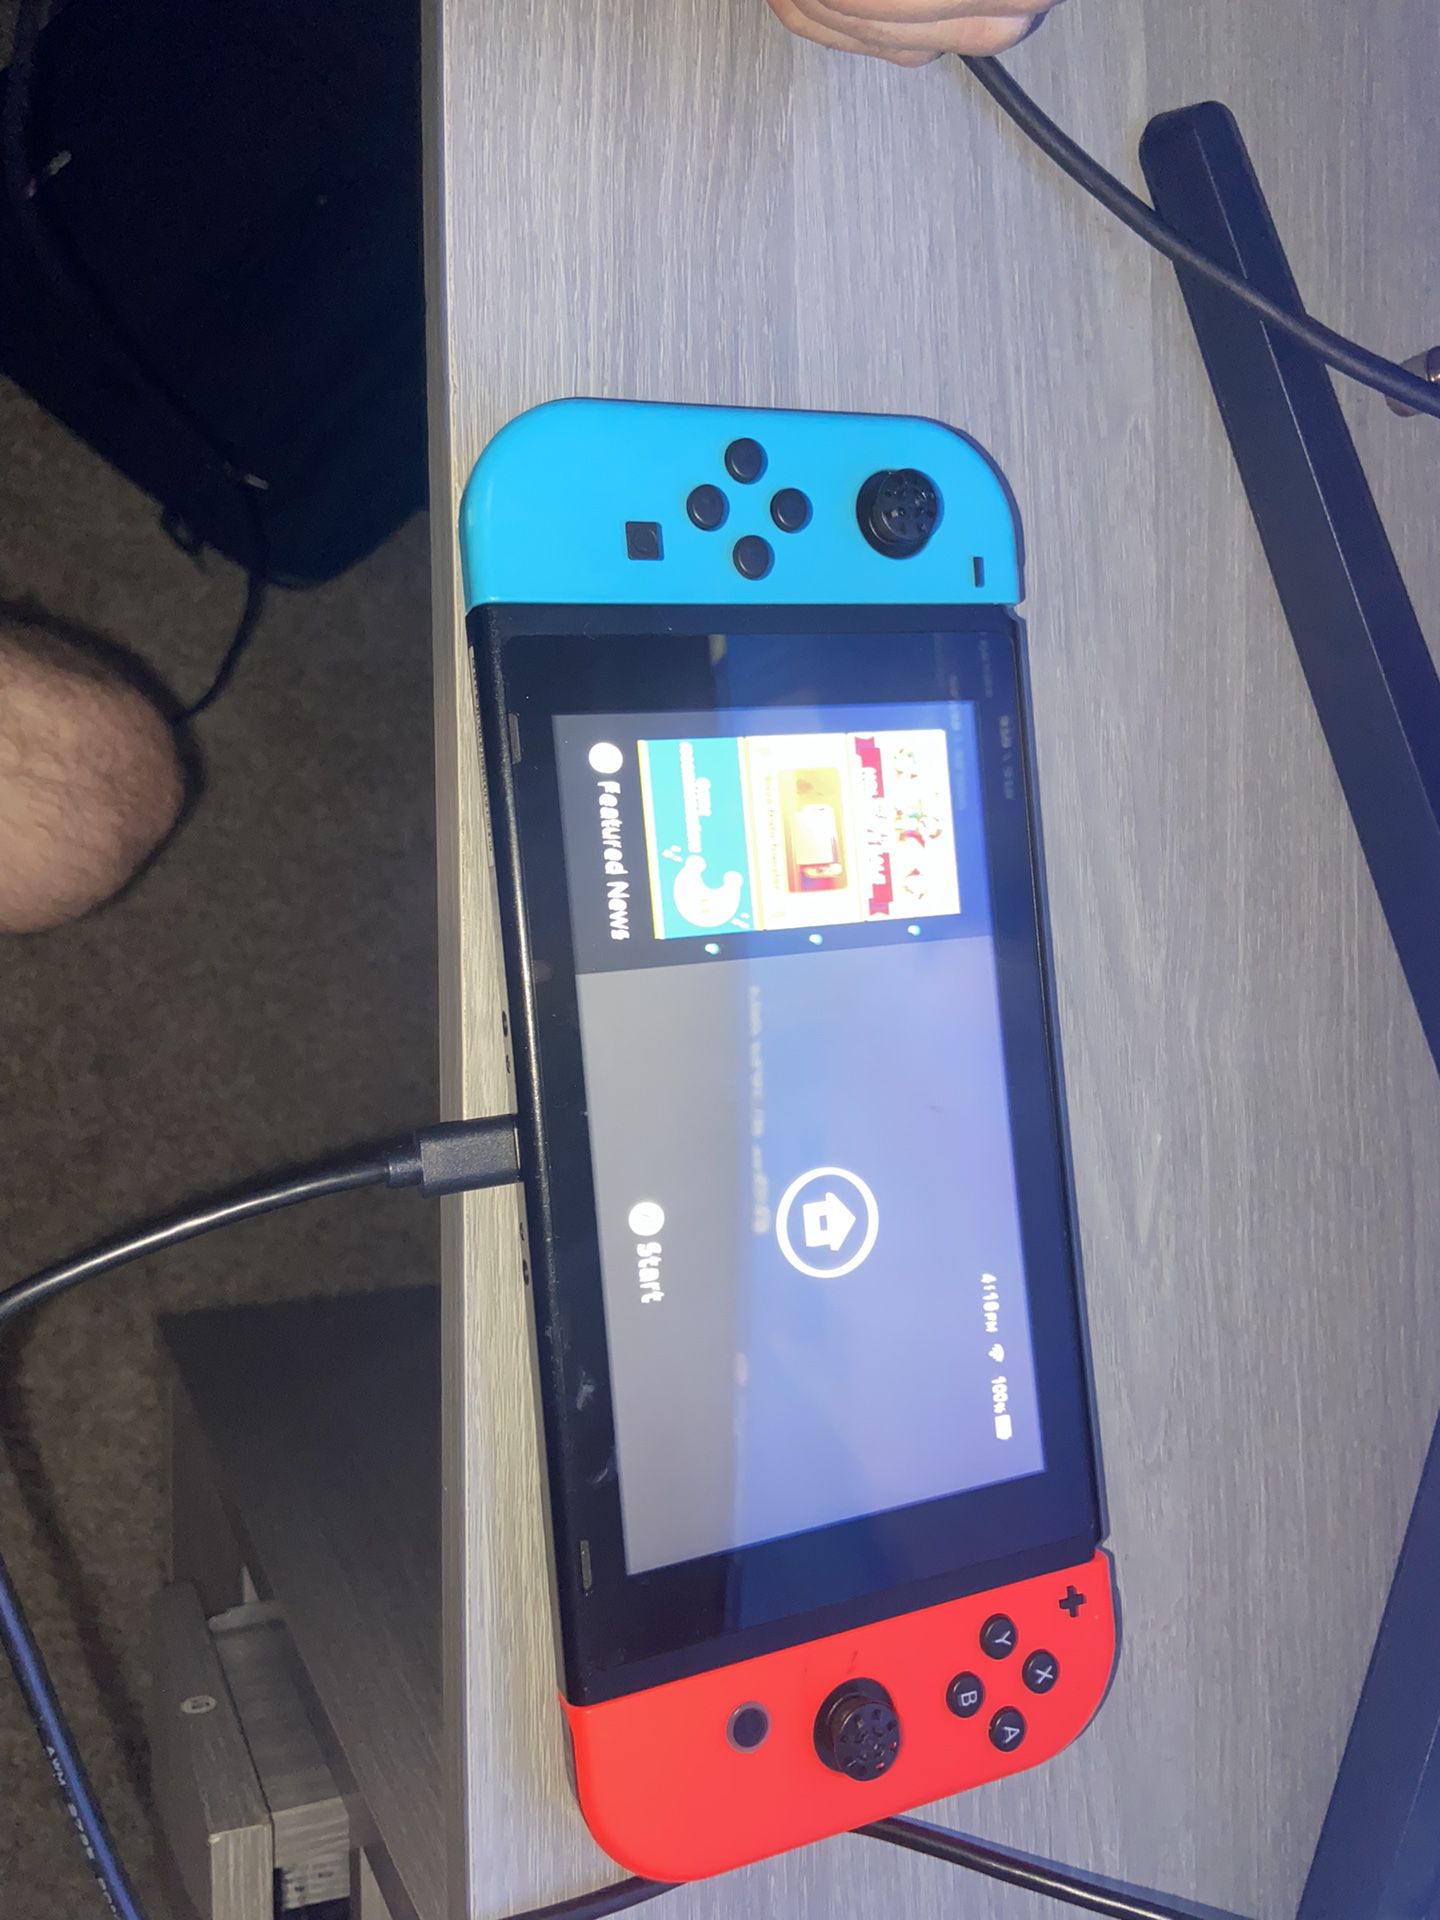 Nintendo Switch With 1 Game 